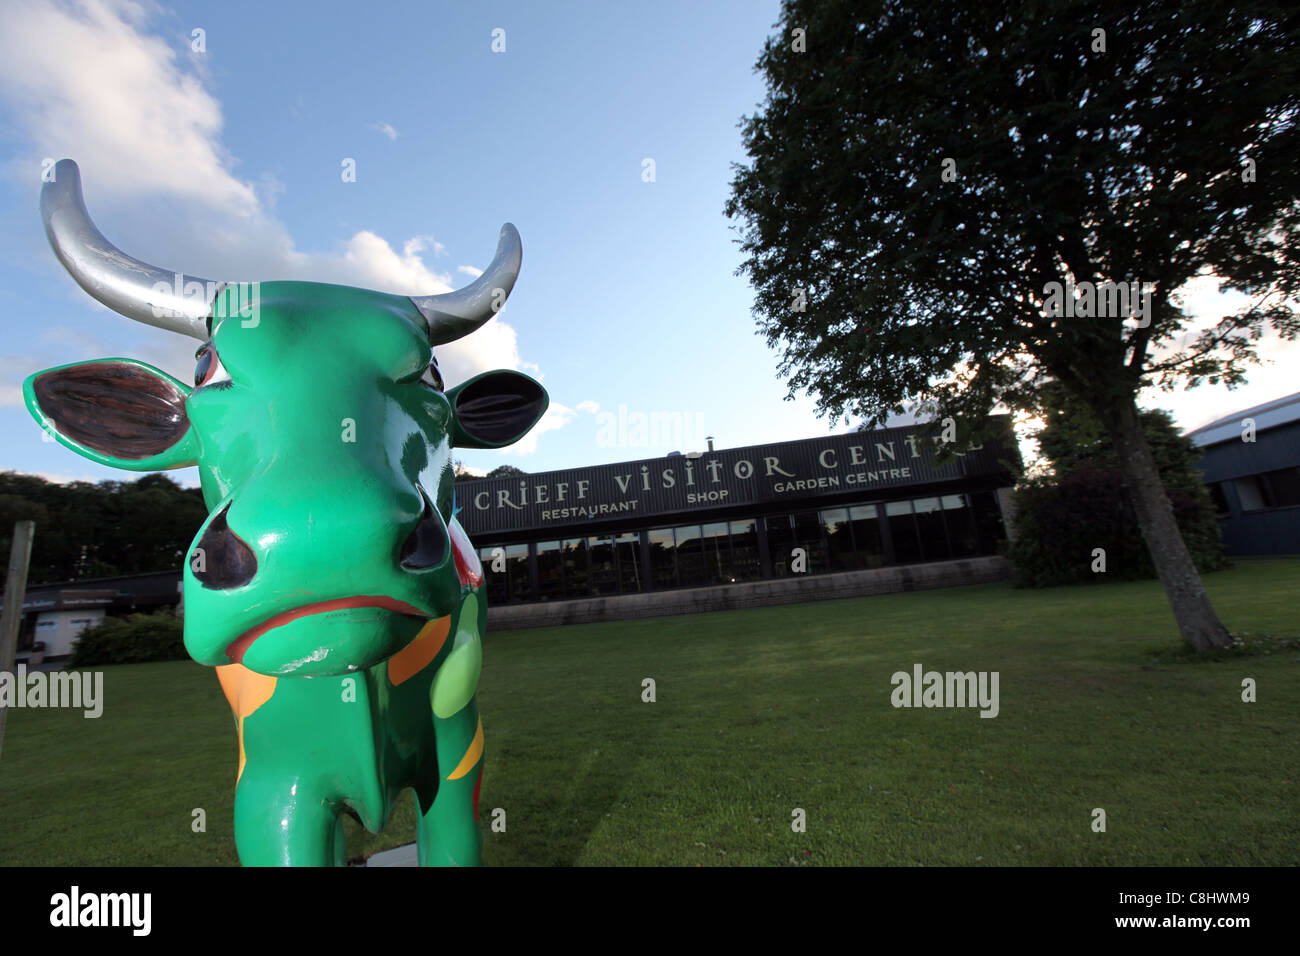 Model cow in front of Crieff visitor centre in the town of Crieff in Perthshire, Scotland, UK Stock Photo